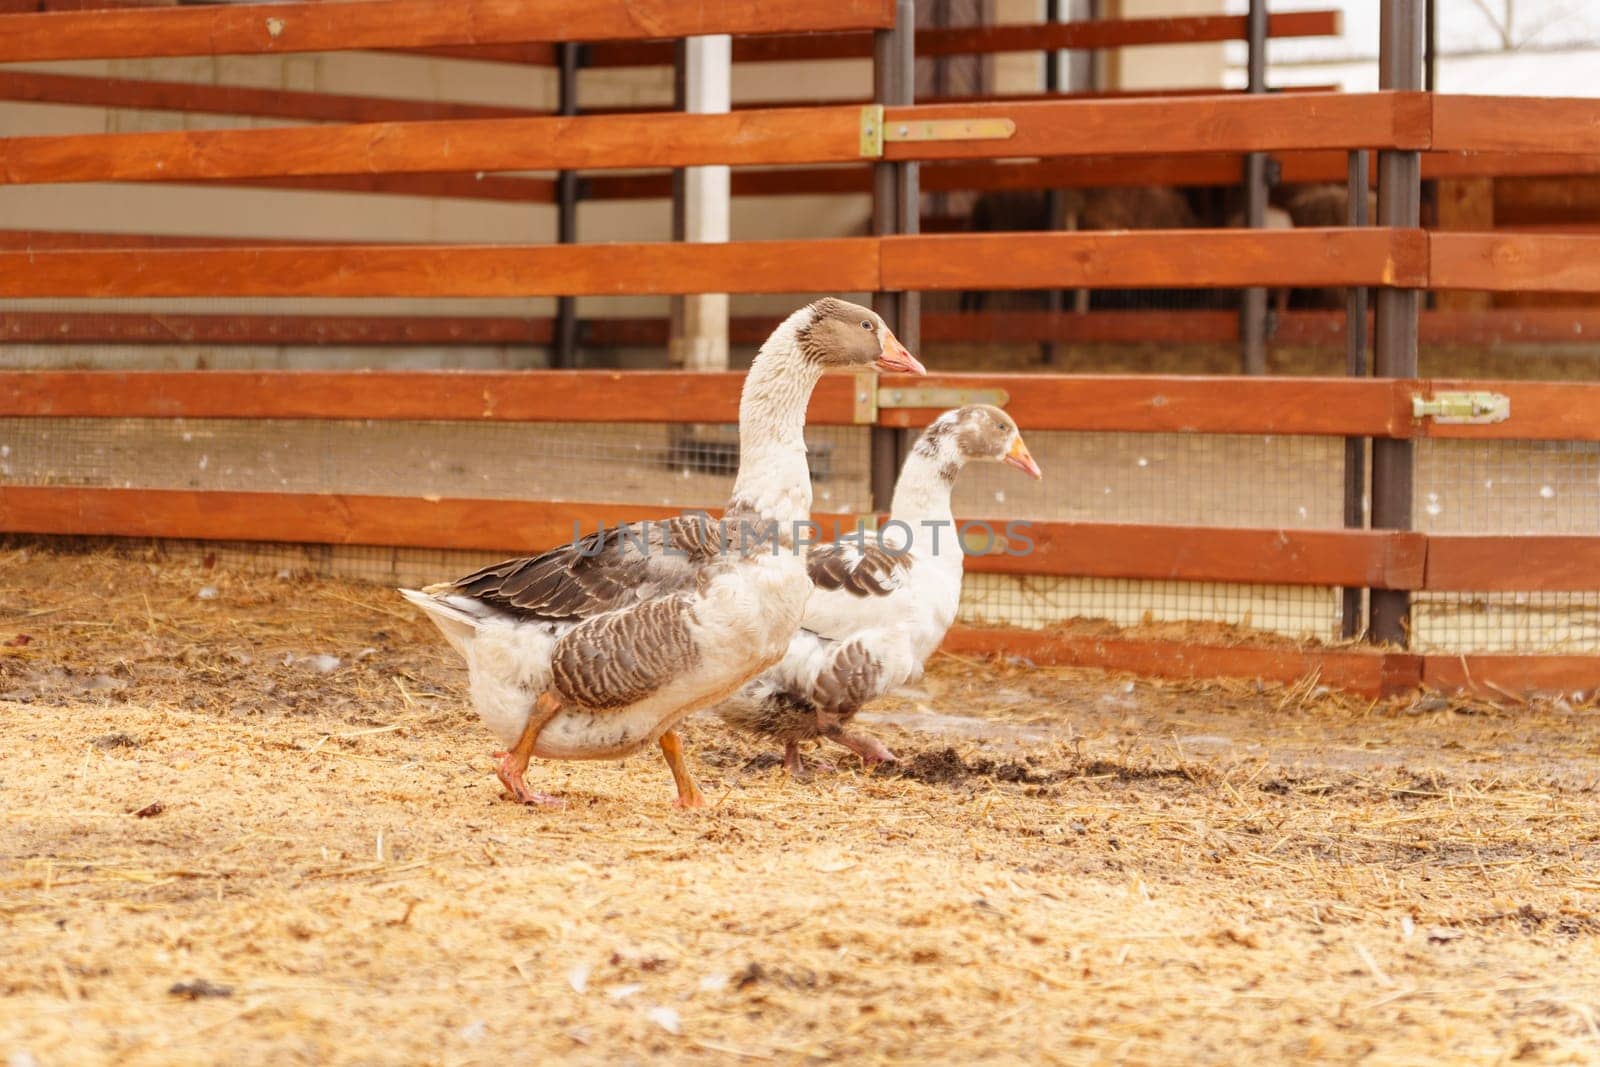 Geese across the dusty ground of a charming farmstead. Selective focus.